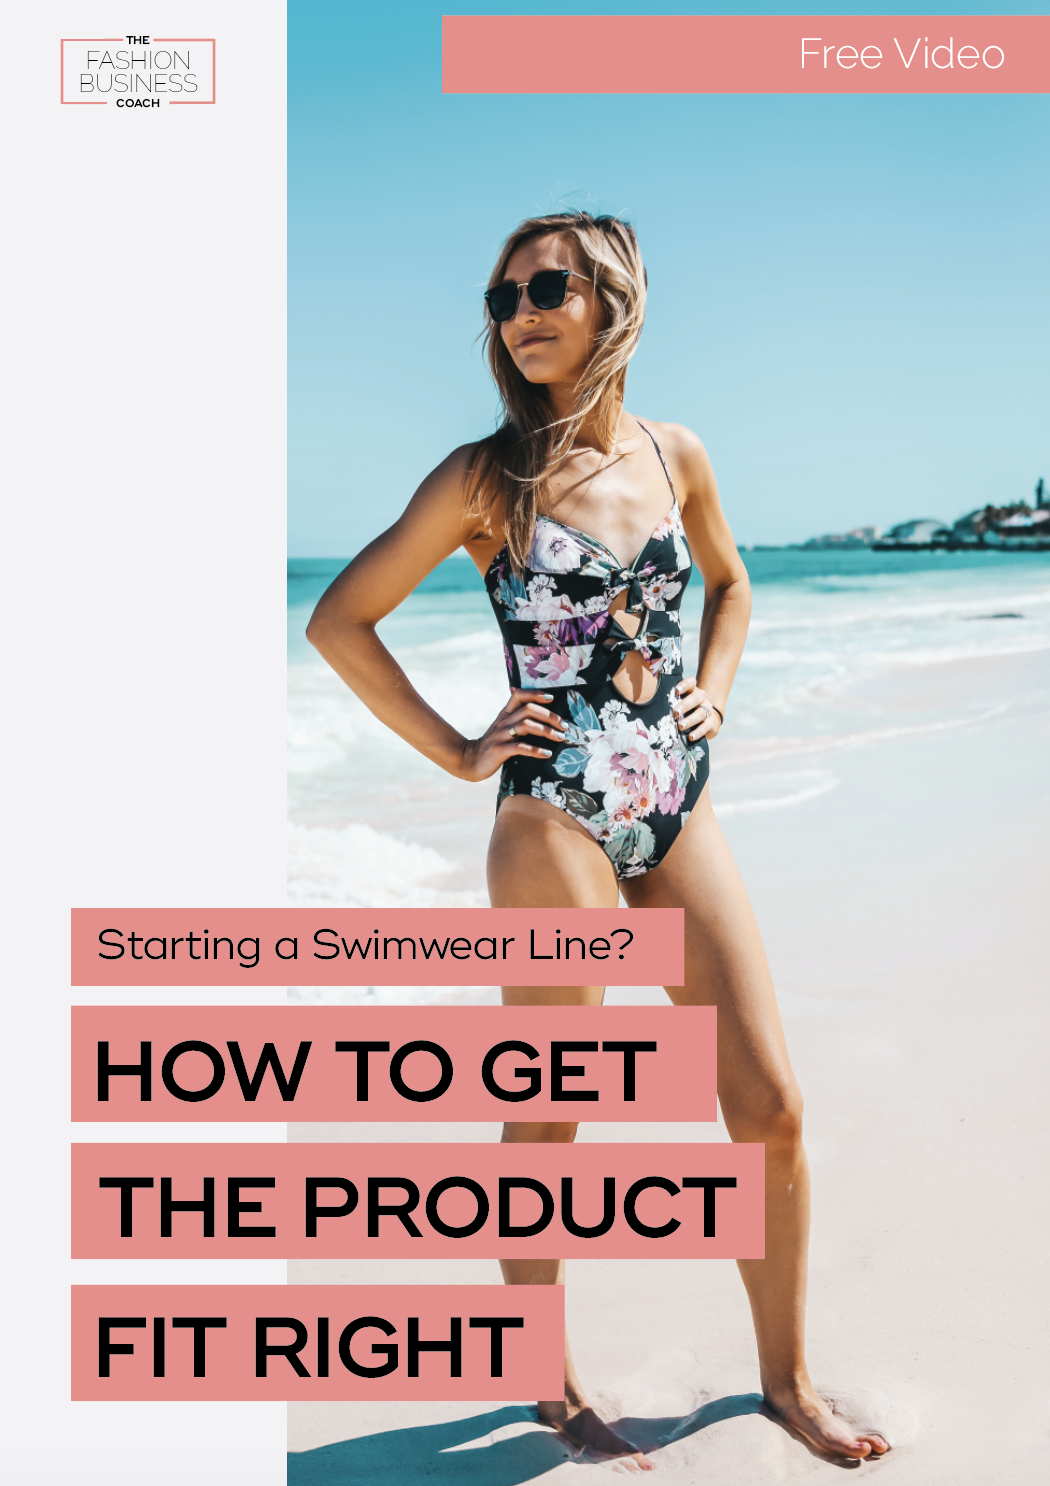 How To Properly Care for Your Swimwear - Lyon Financial